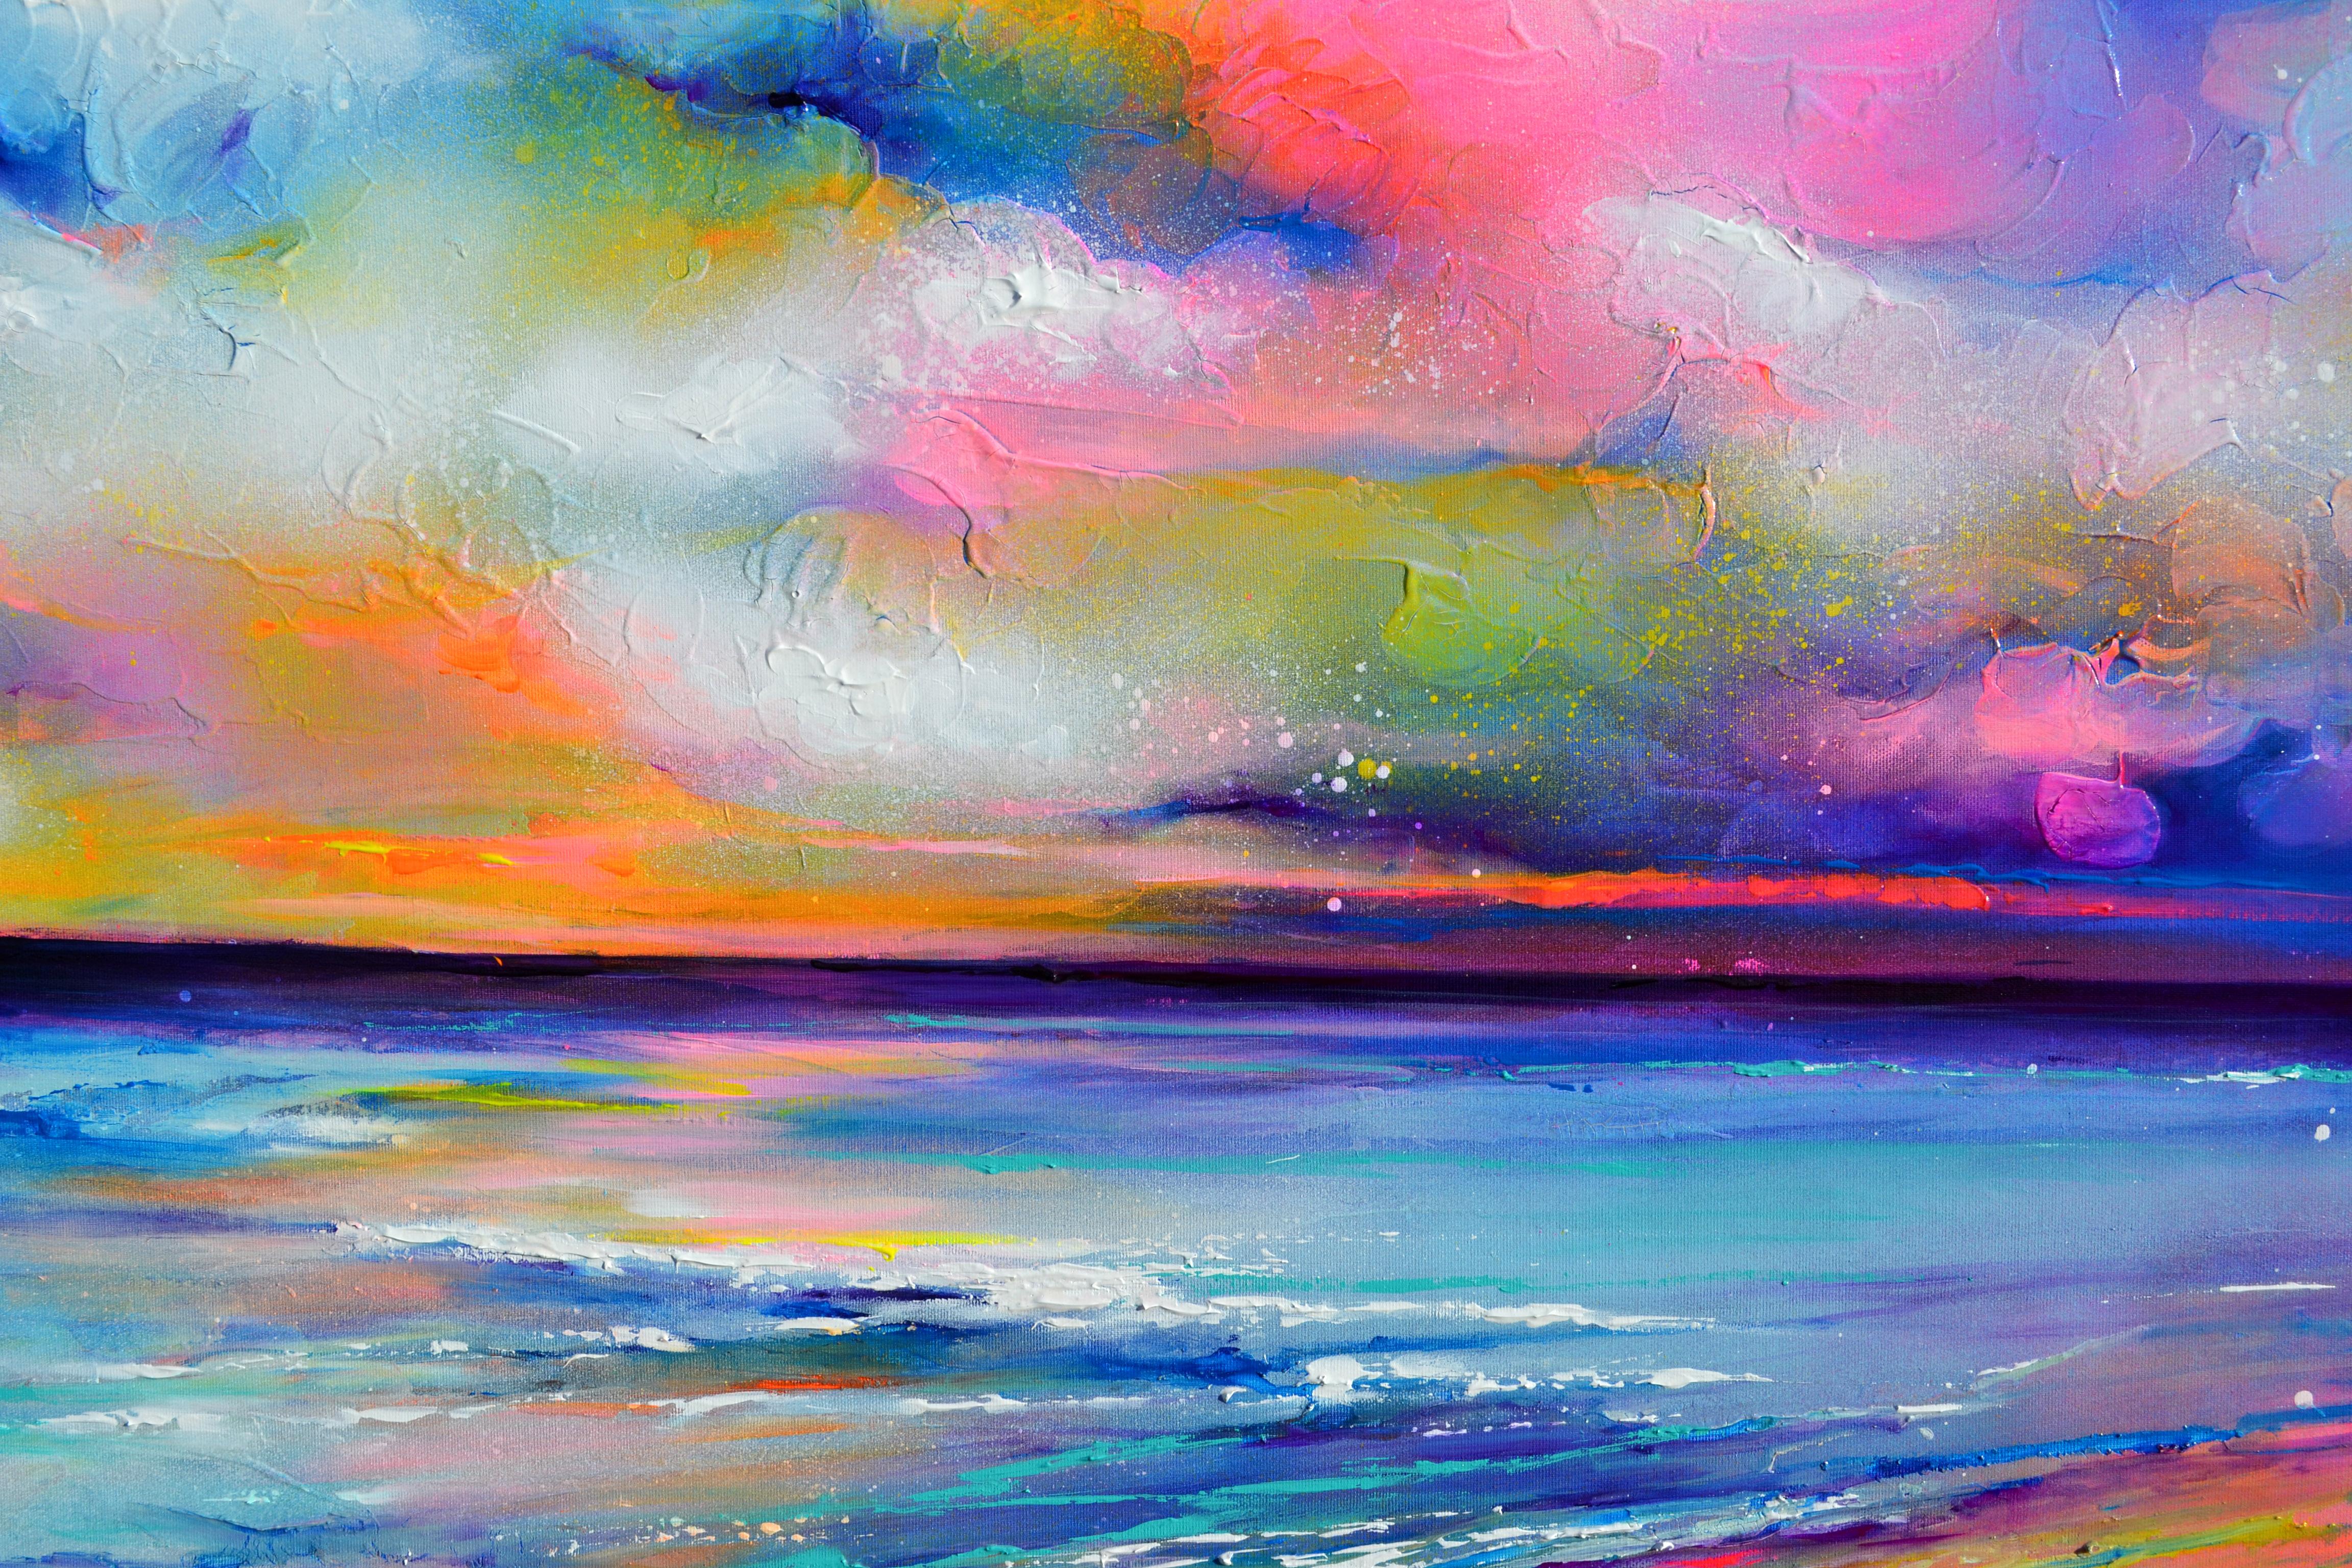 New Horizon 175 Colourful Sunset Seascape - Impressionist Painting by Soos Roxana Gabriela